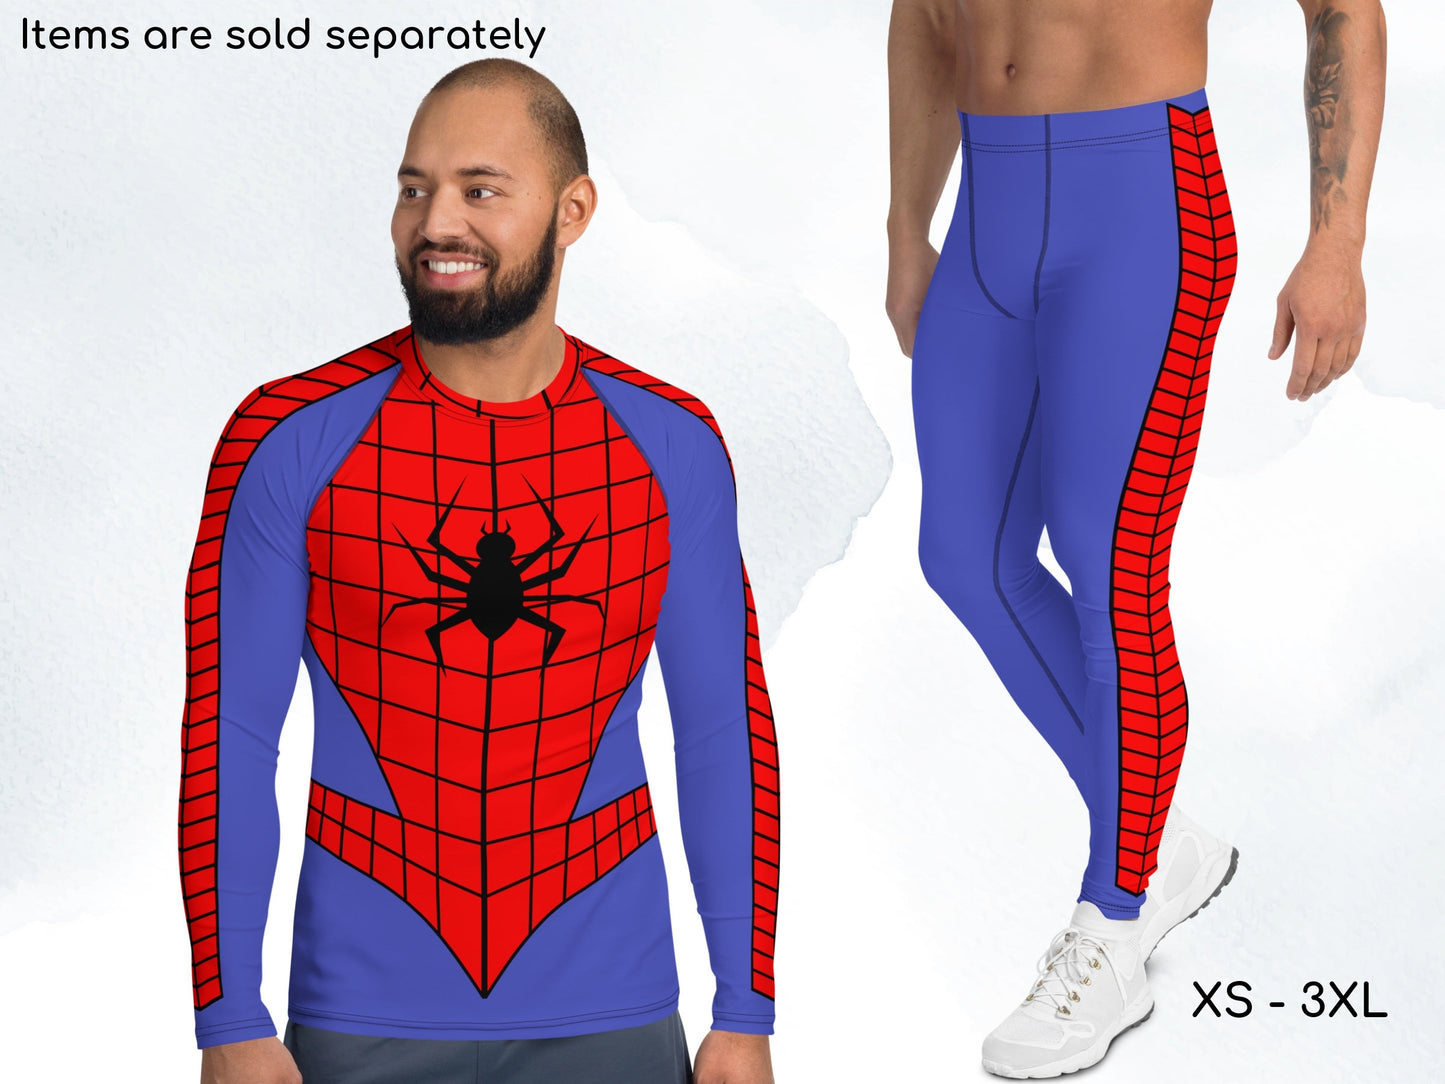 Spider Hero Inspired Men's Rash Guard and Leggings, Cosplay, Halloween Costume, Comics, Super Guardian, Human Spider, Cosplay Outfit